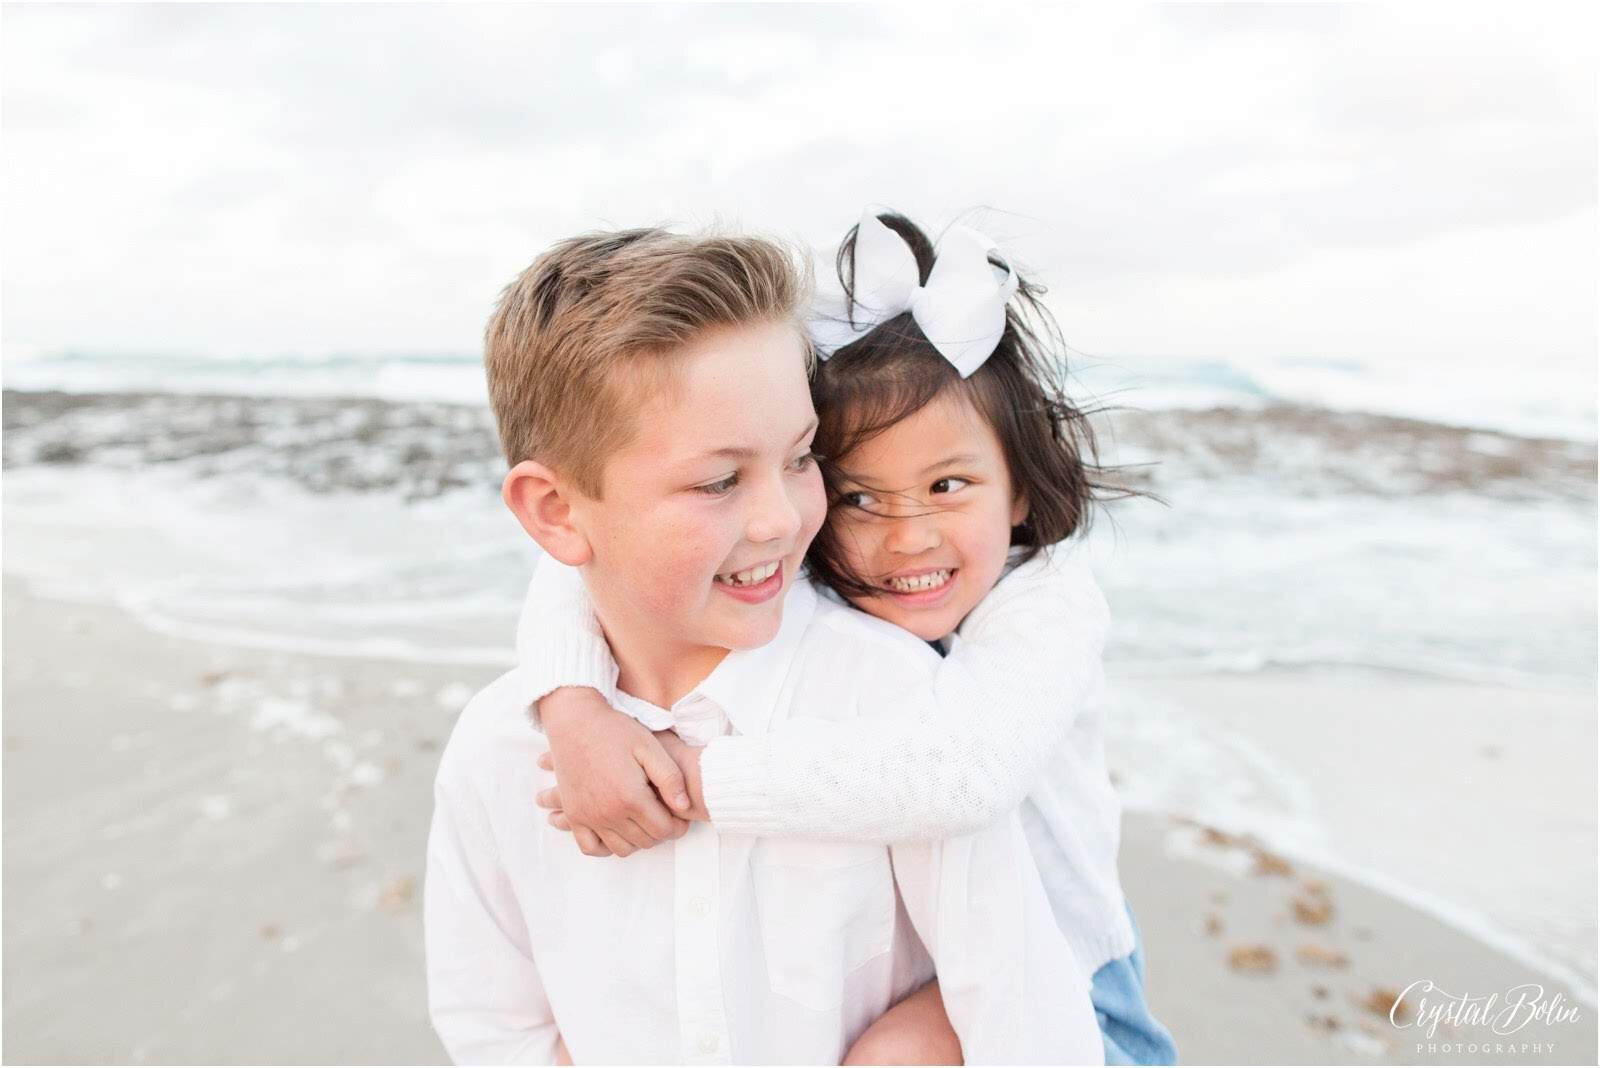 Gier Family Vacation Portraits on Singer Island, Florida